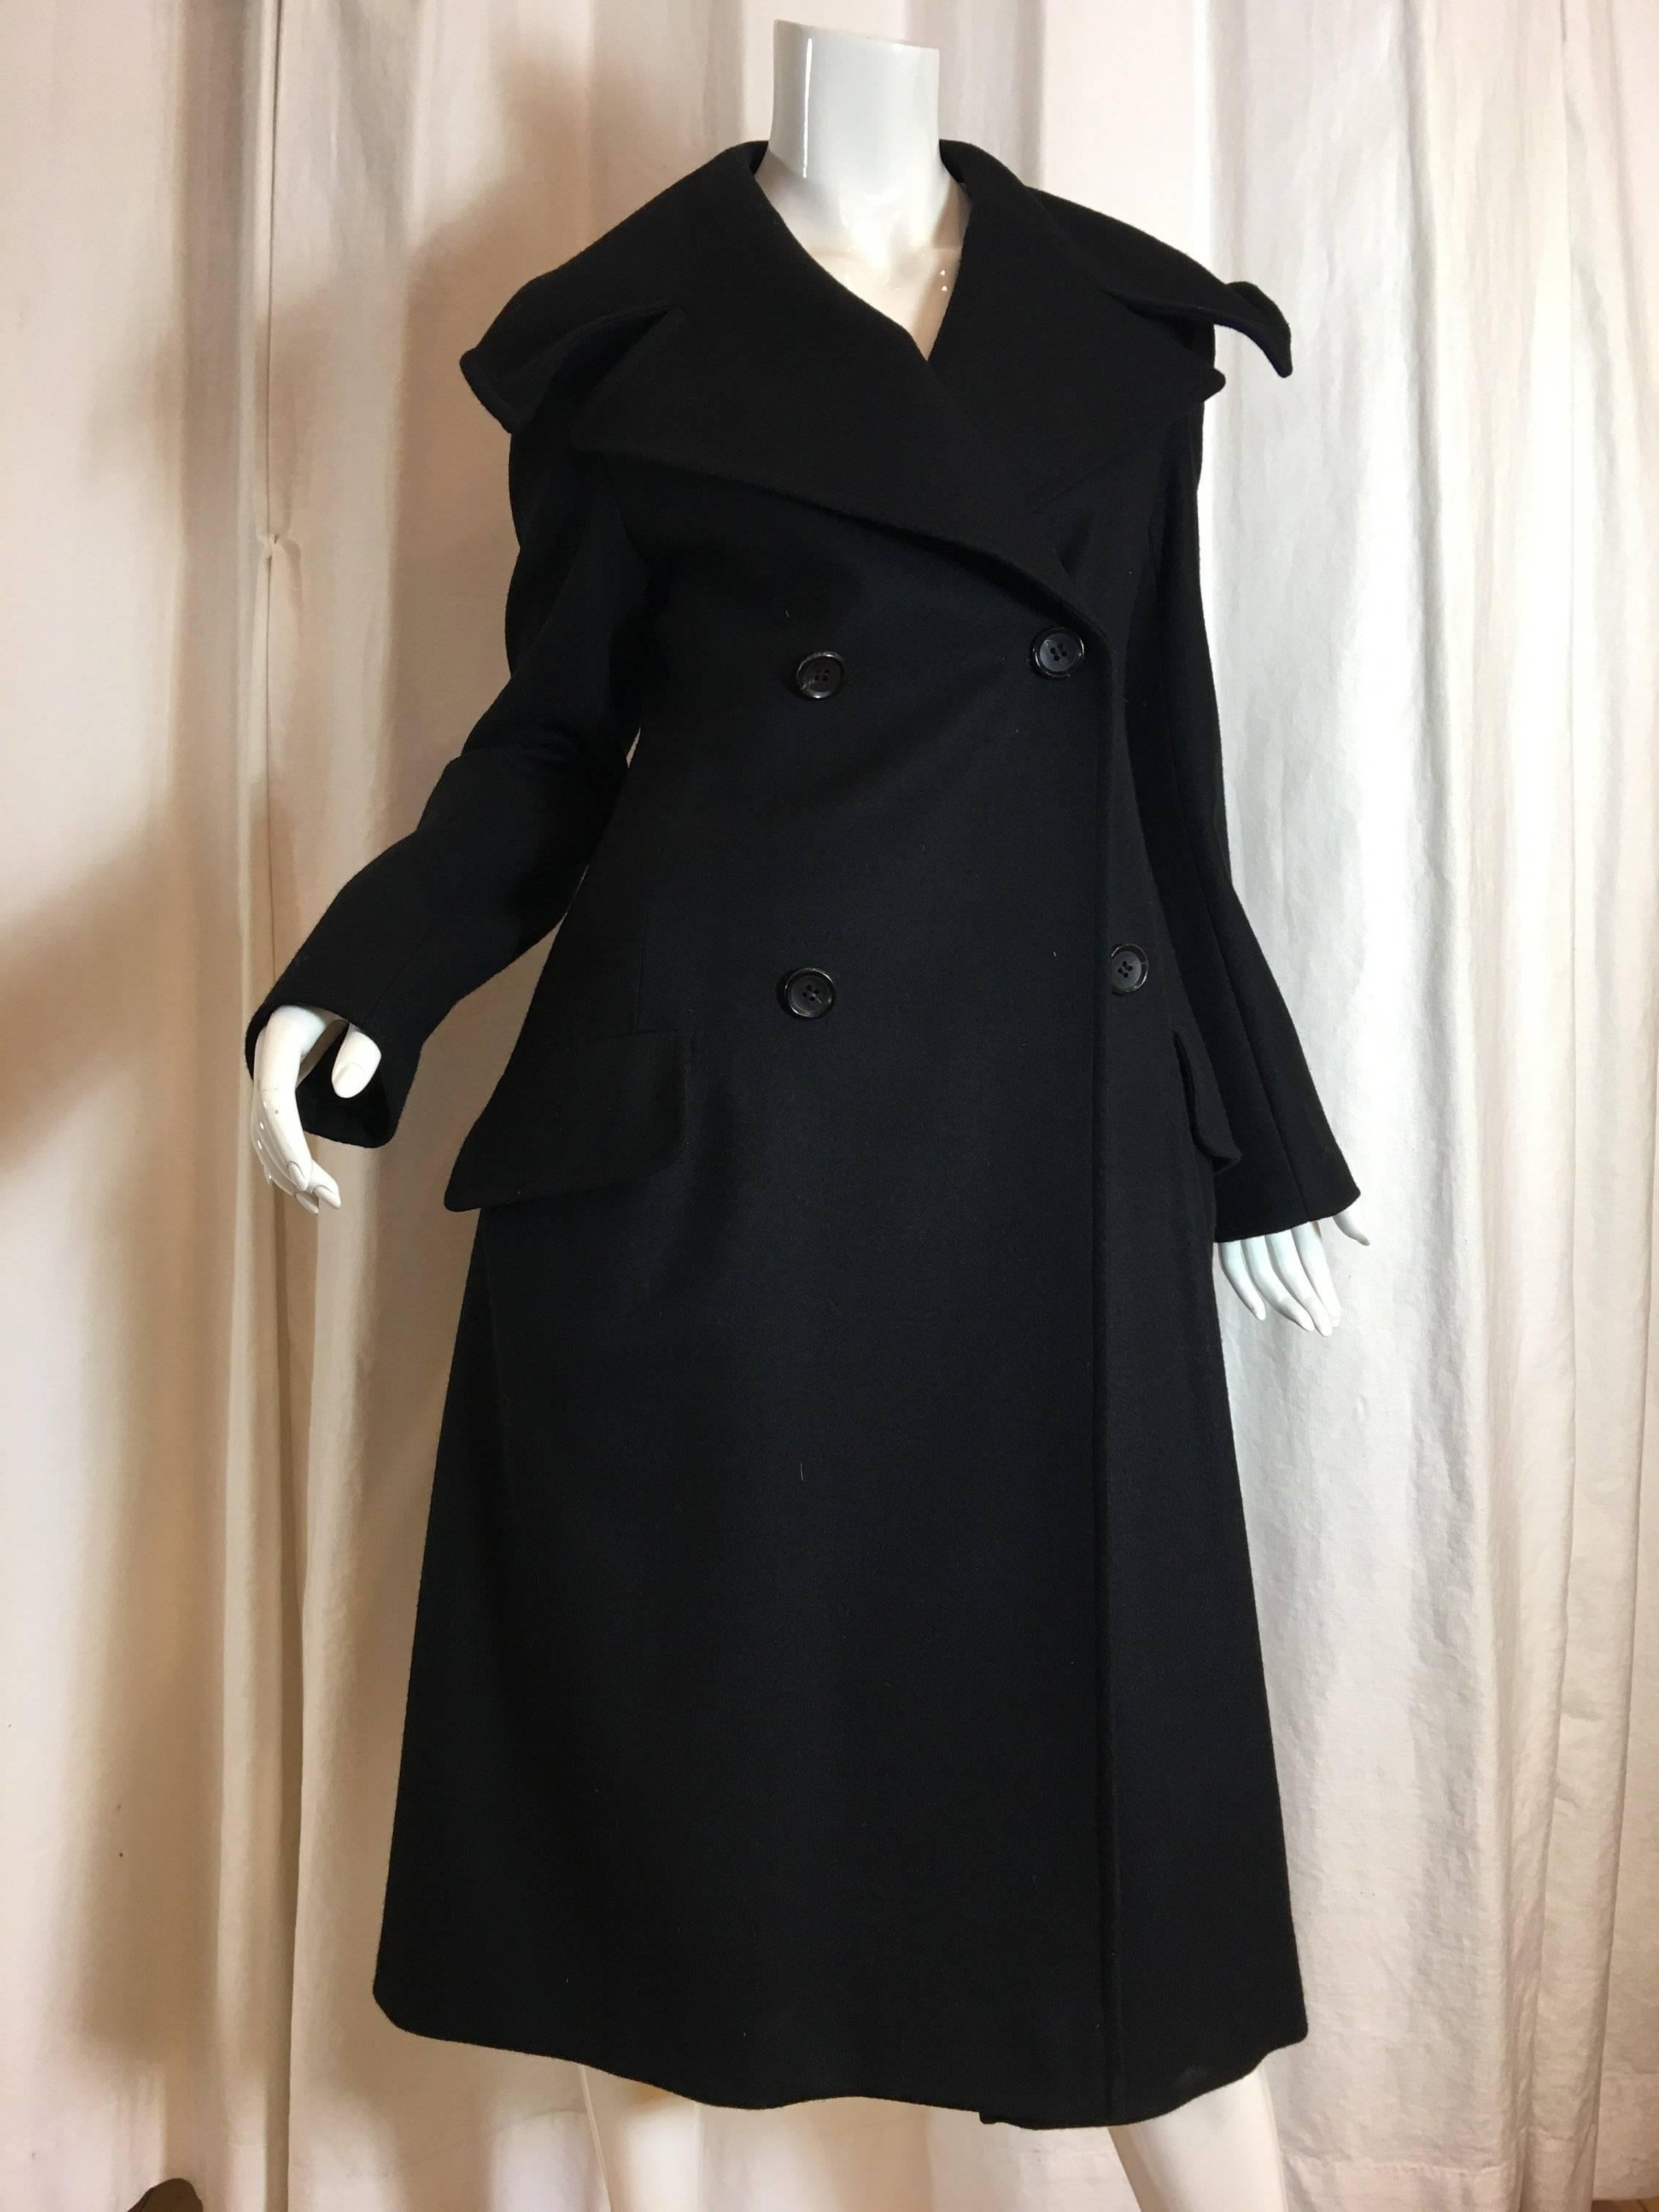 Yohji Yamamoto Black Single Breasted Coat with Ruffled Collar. Wool and Cashmere with formable collar.